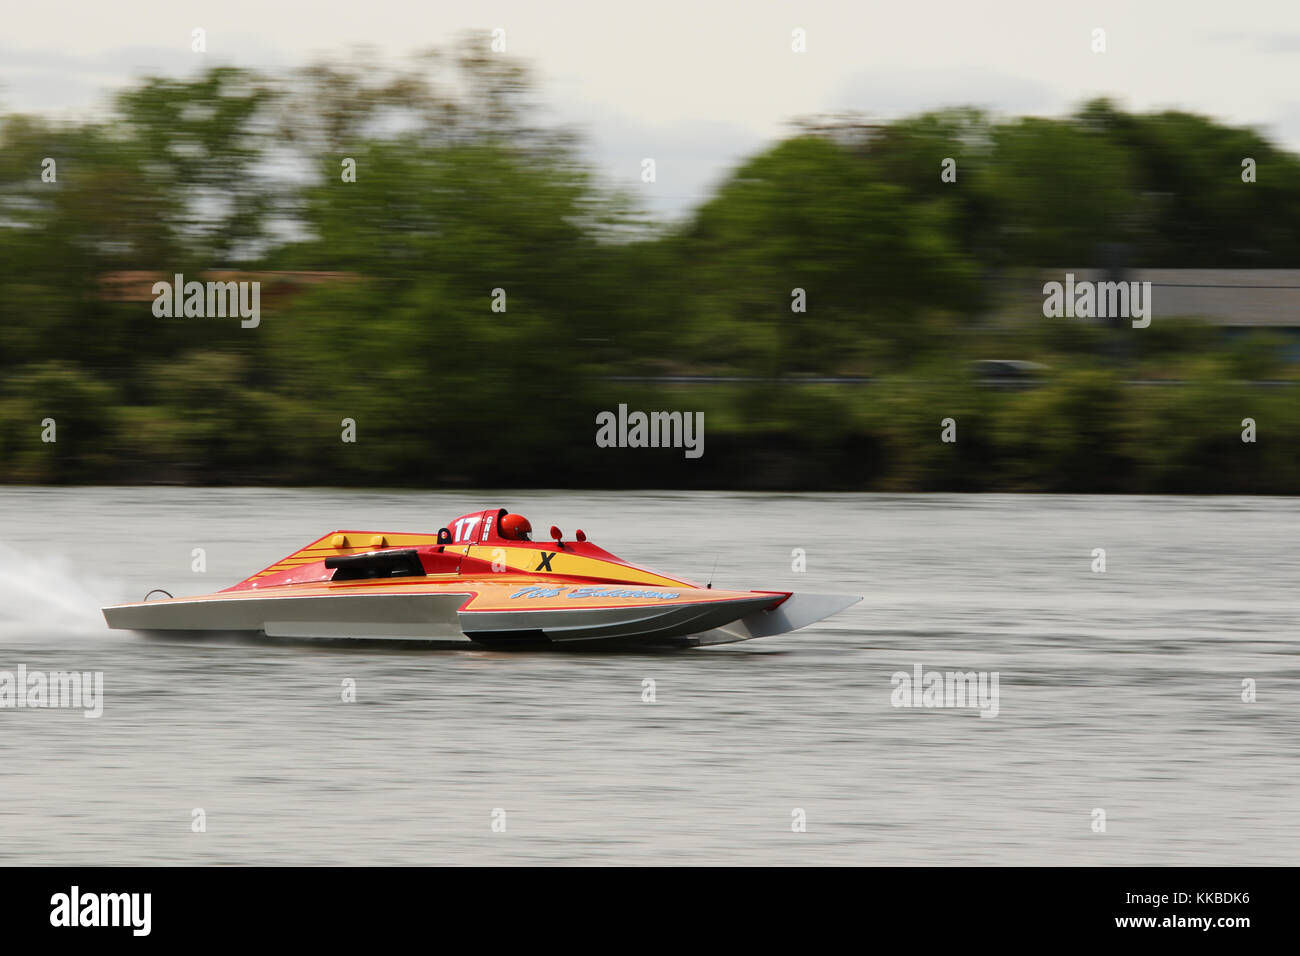 Race Boat GNH17. 2017 APBA, American Power Boat Association, Test and Tune day at Eastwood Lake, Dayton, Ohio, USA. 29 April 2017. Stock Photo